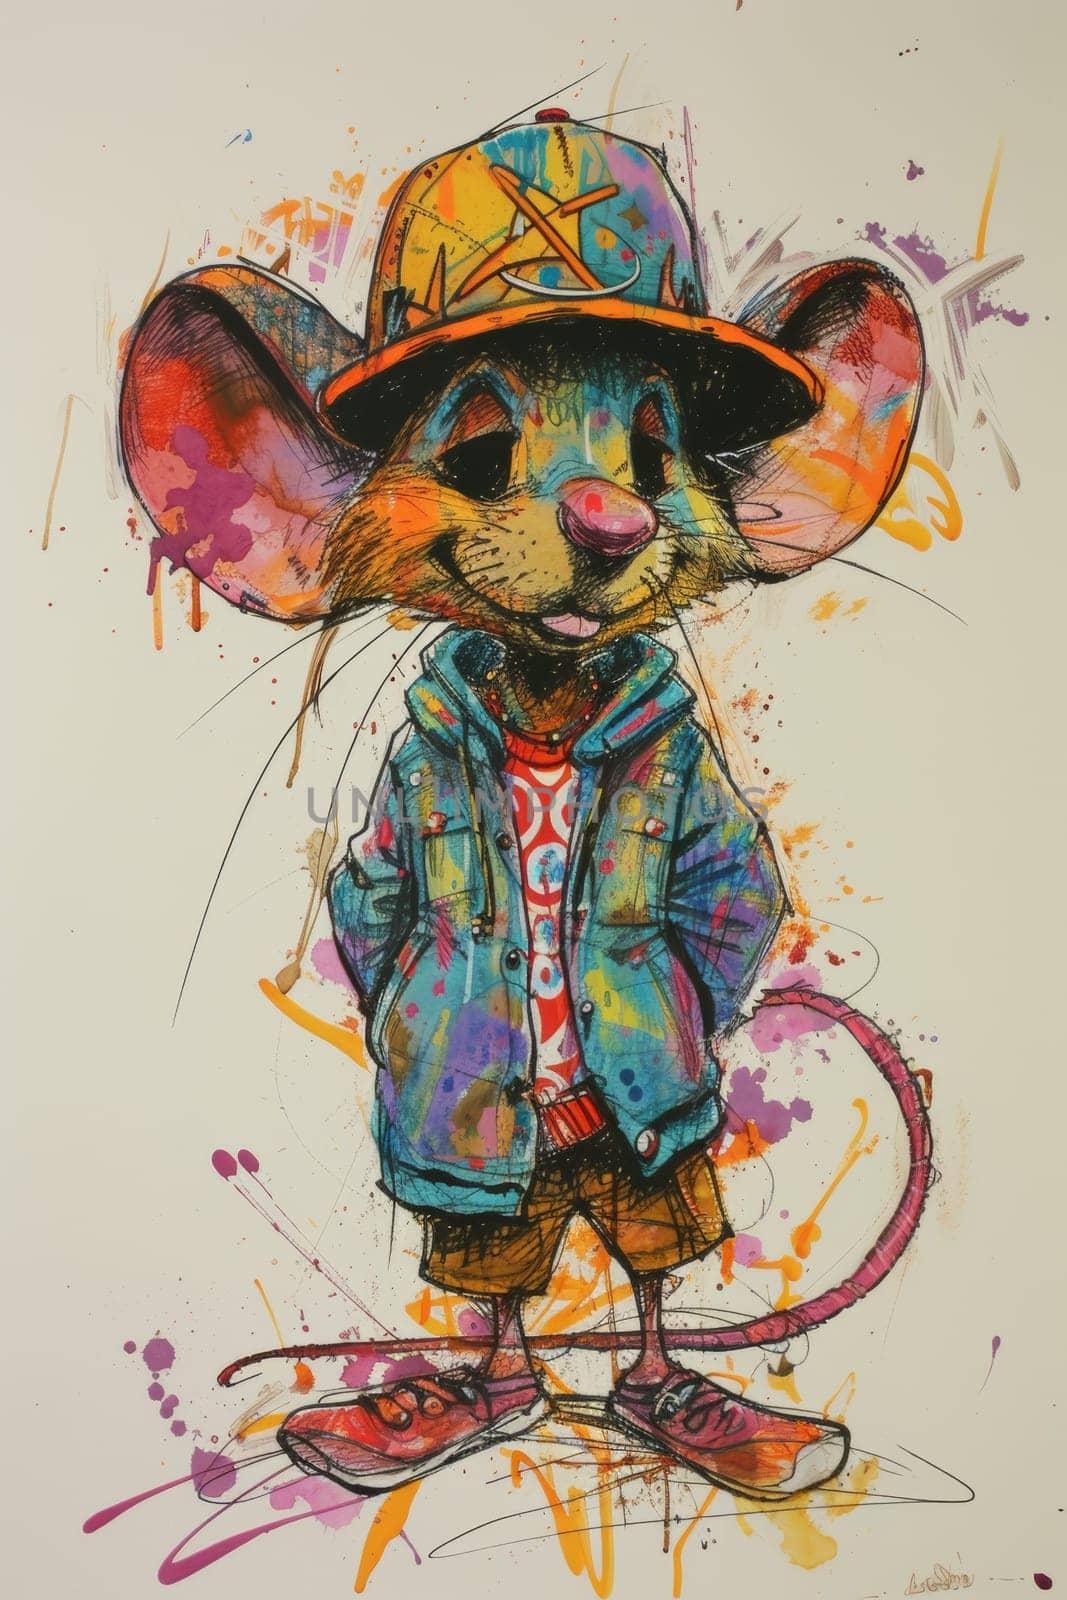 A painting of a mouse wearing clothes and hat standing on the ground, AI by starush